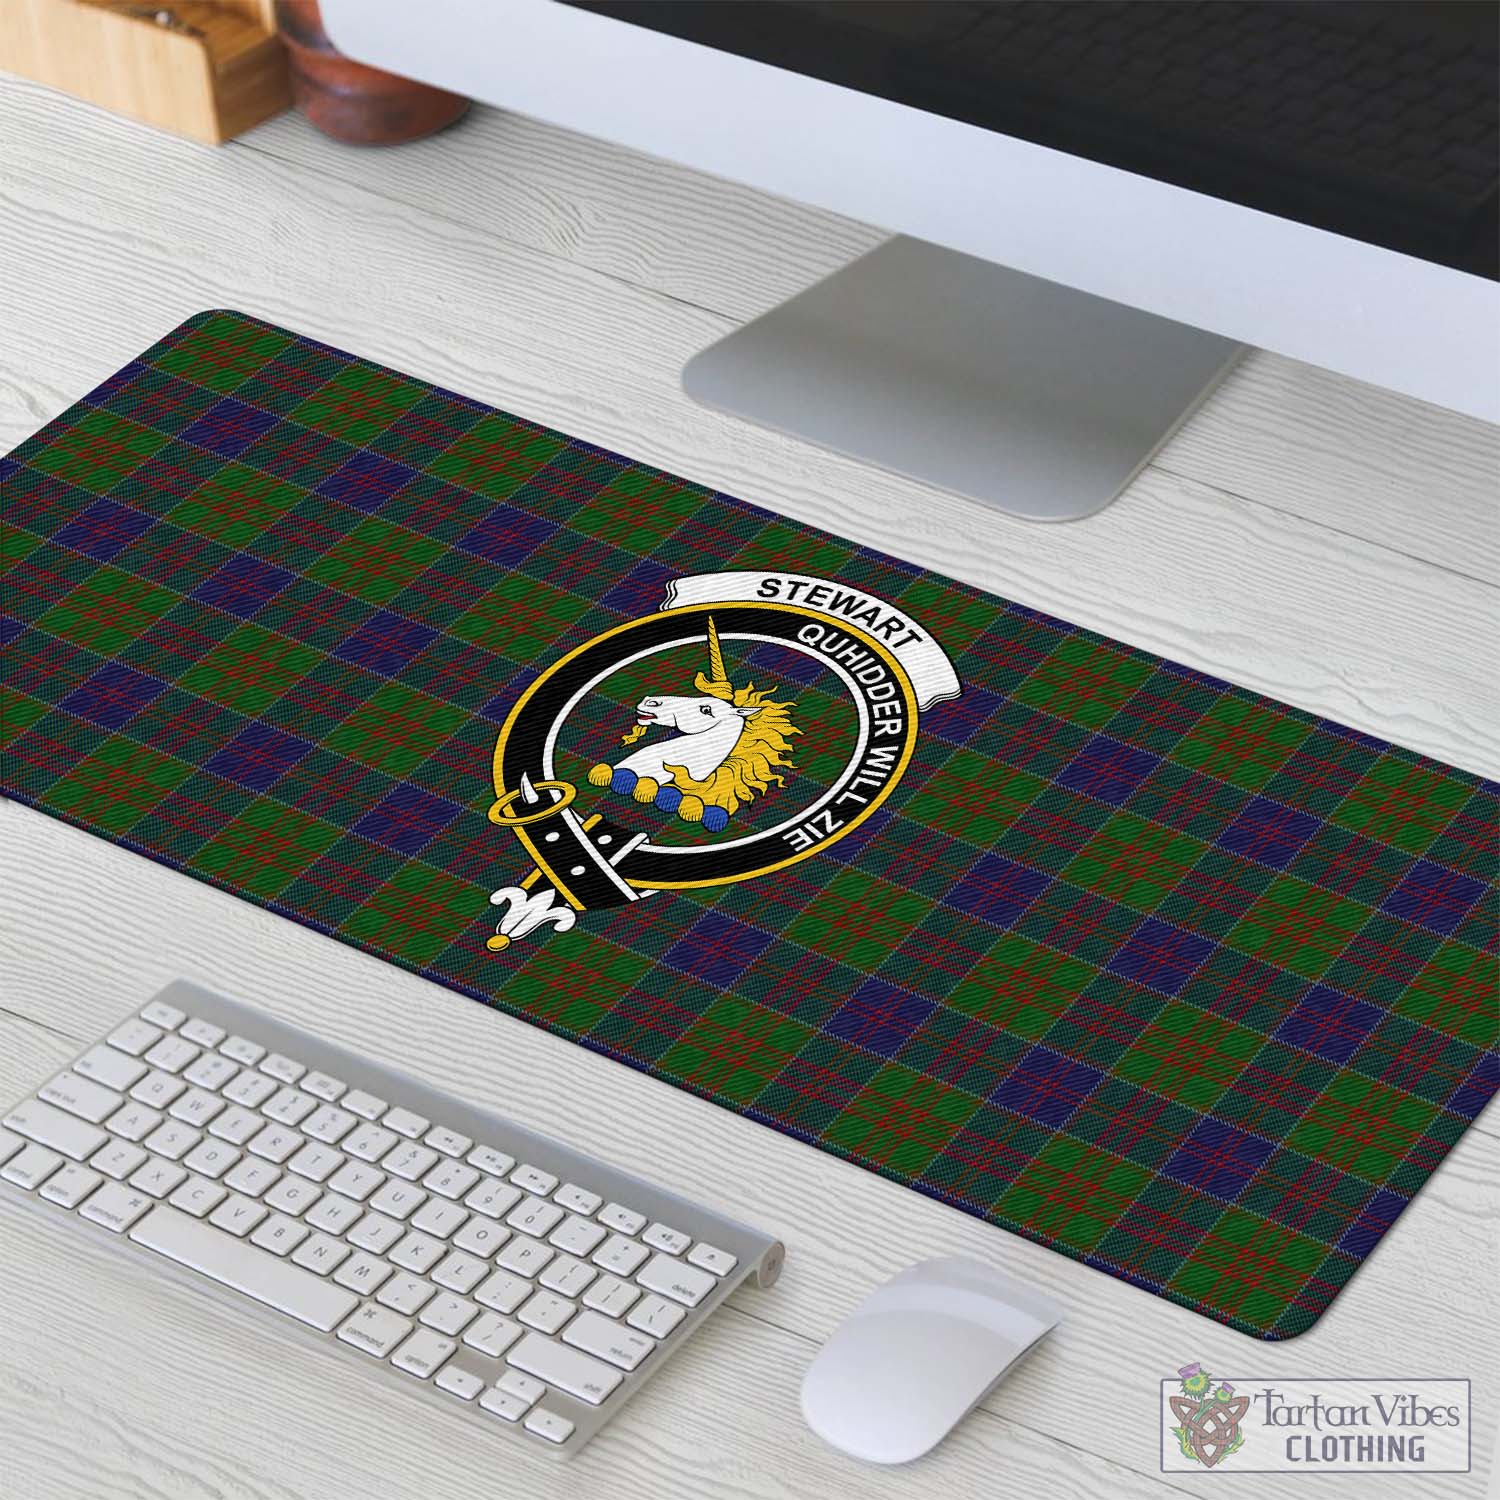 Tartan Vibes Clothing Stewart of Appin Hunting Tartan Mouse Pad with Family Crest